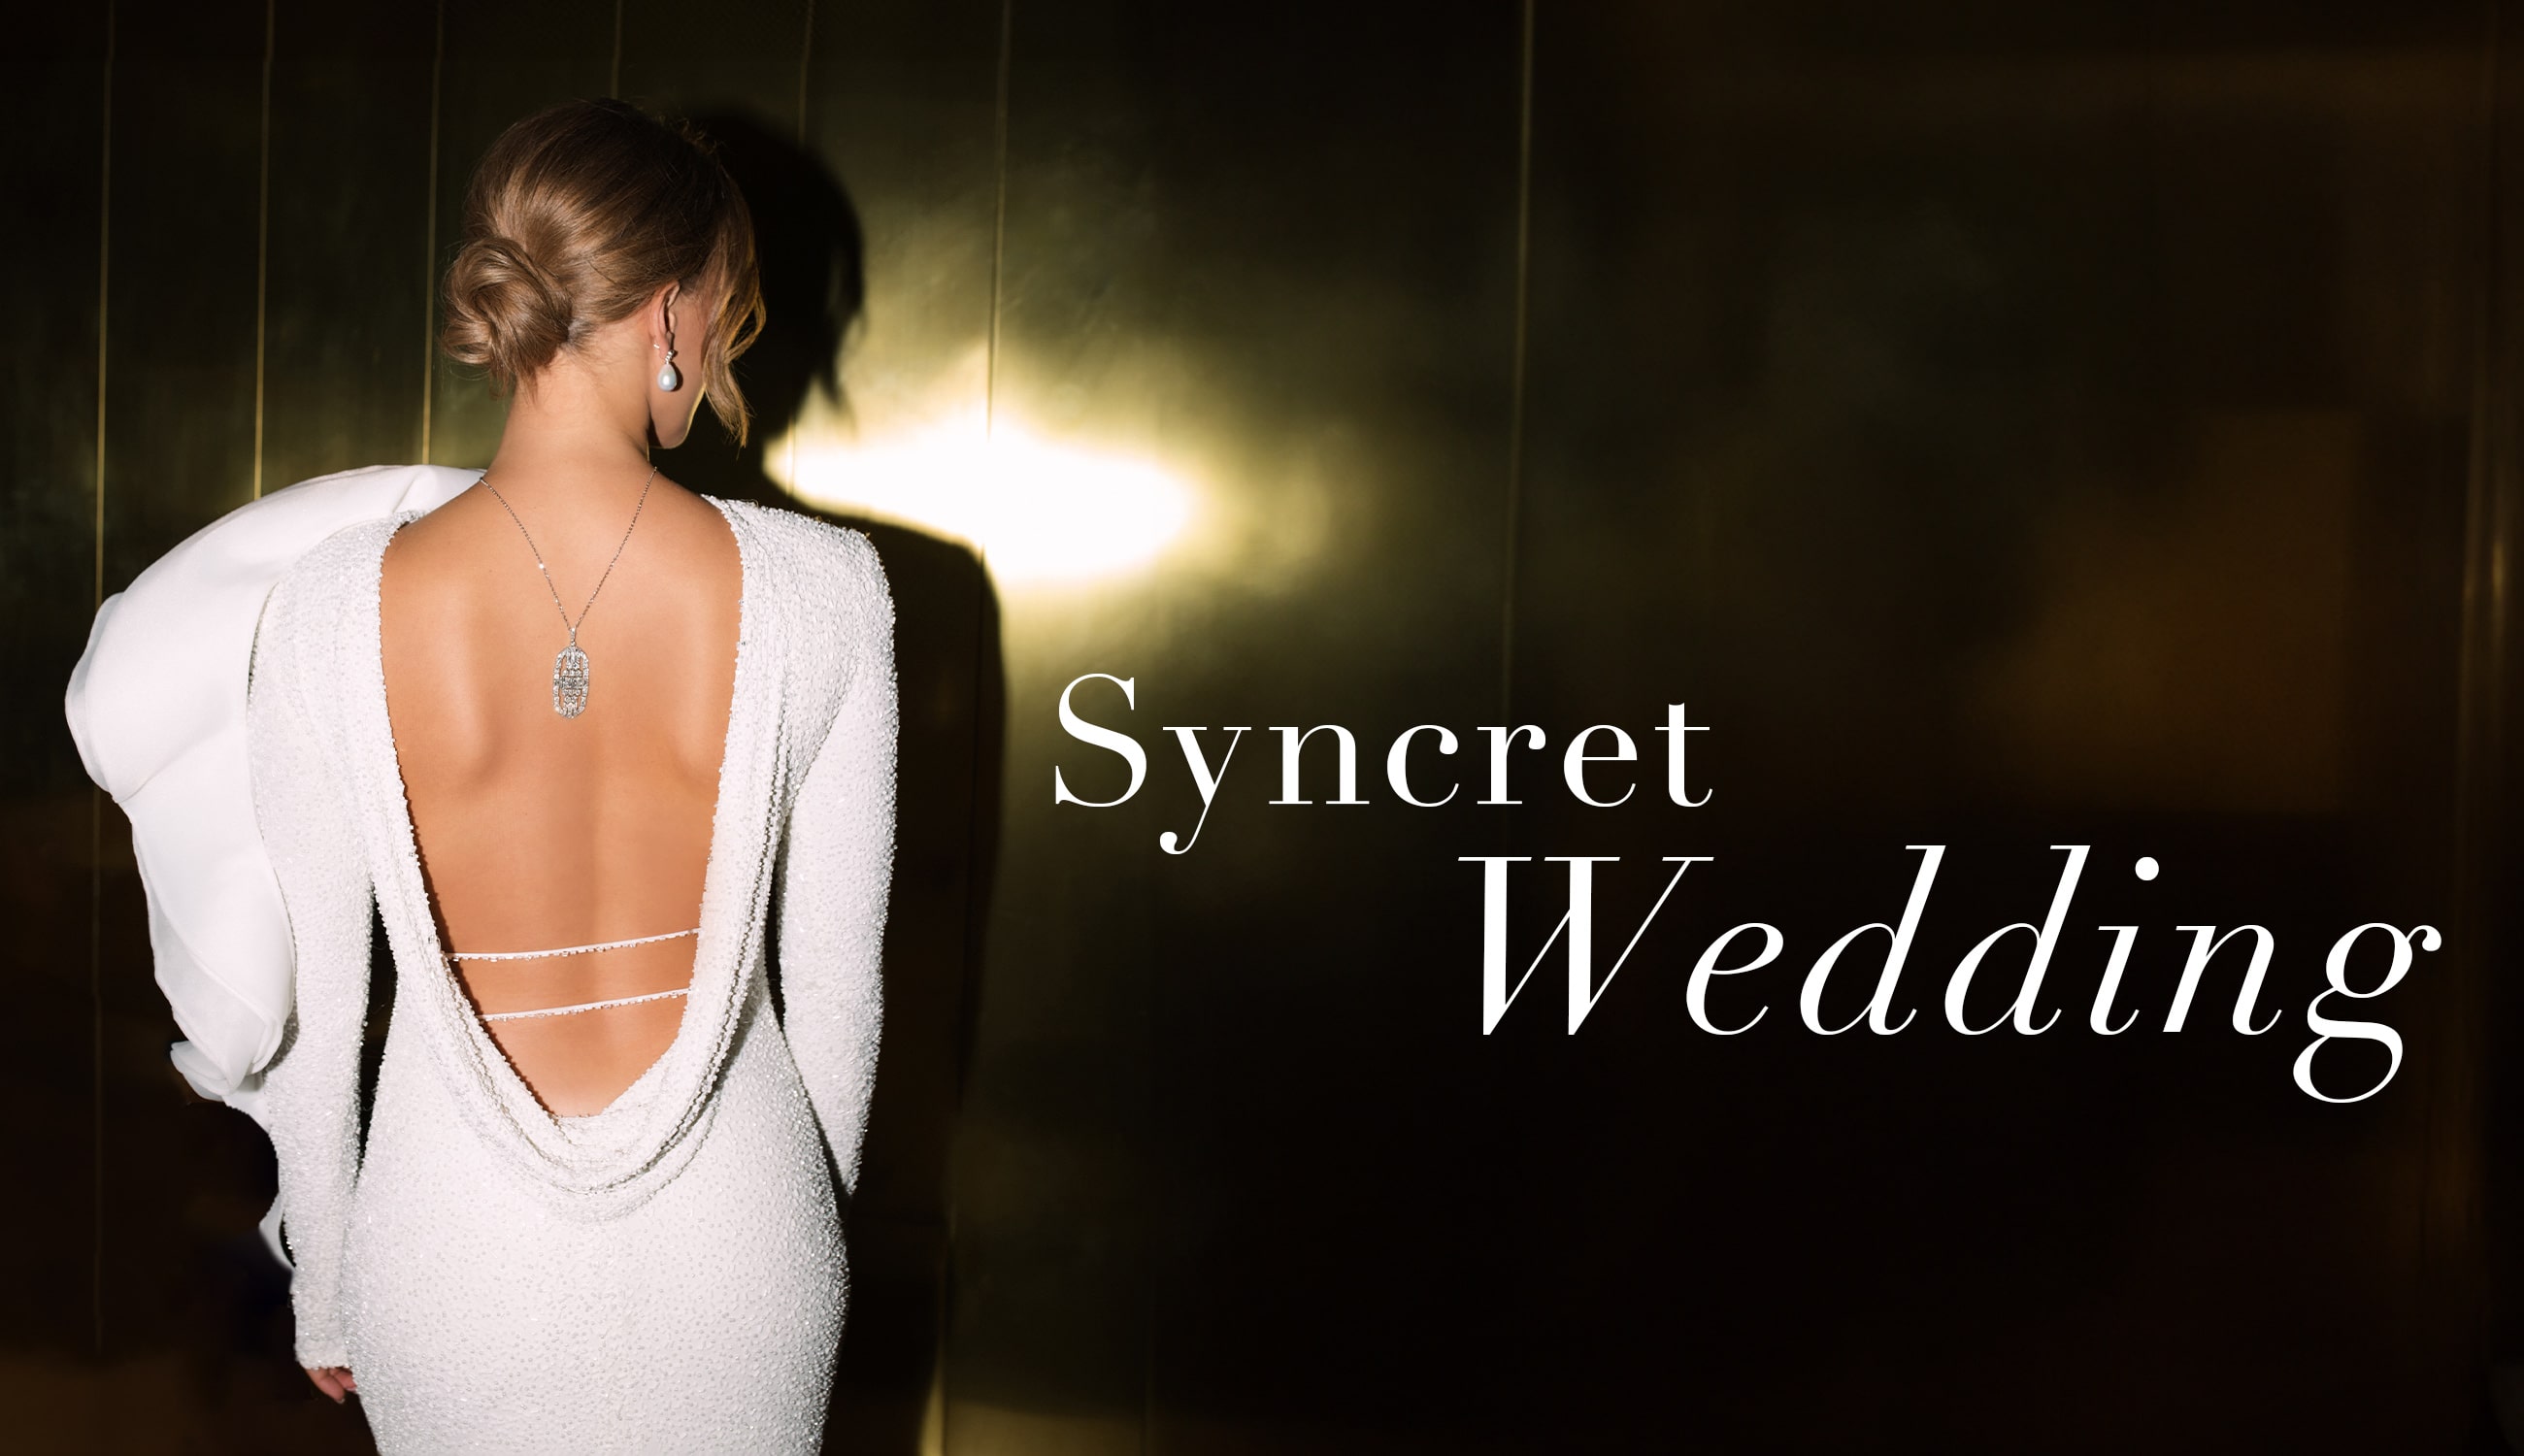 Syncret Wedding collection